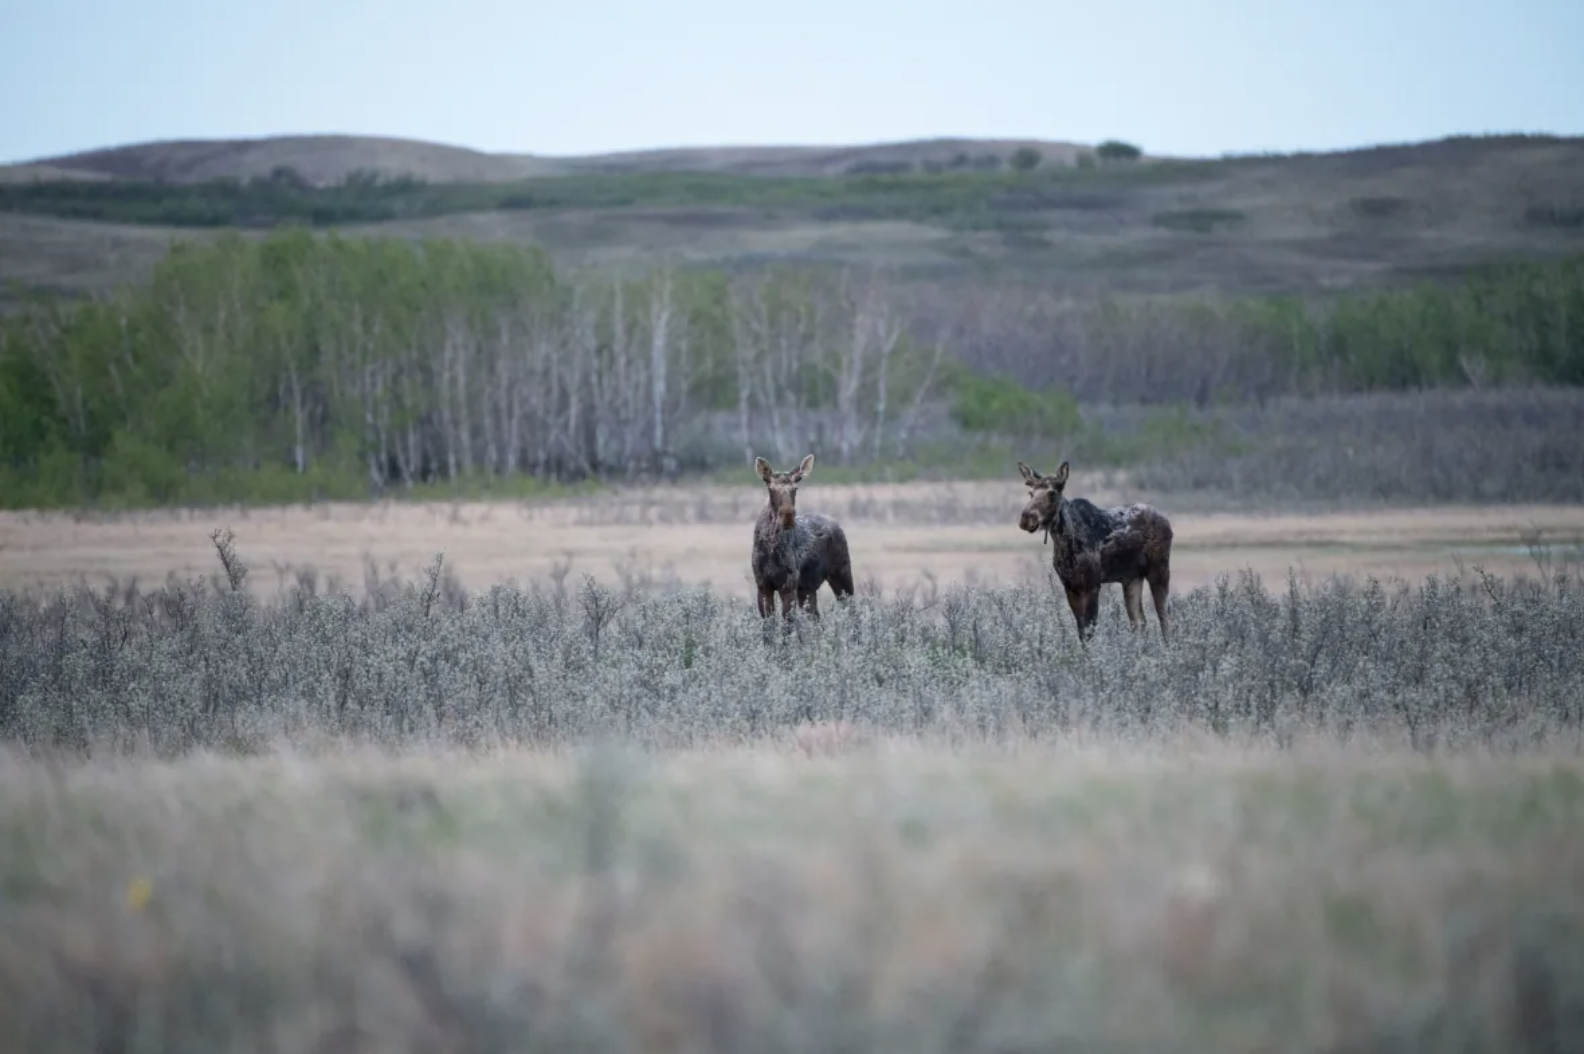 (Jason Bantle/Nature Conservancy of Canada) Moose are walking across the grasslands on the Mackie Ranch property. Besides birds, big game species like deer and moose also like the area, according to the Nature Conservancy of Canada. (Jason Bantle/Nature Conservancy of Canada)